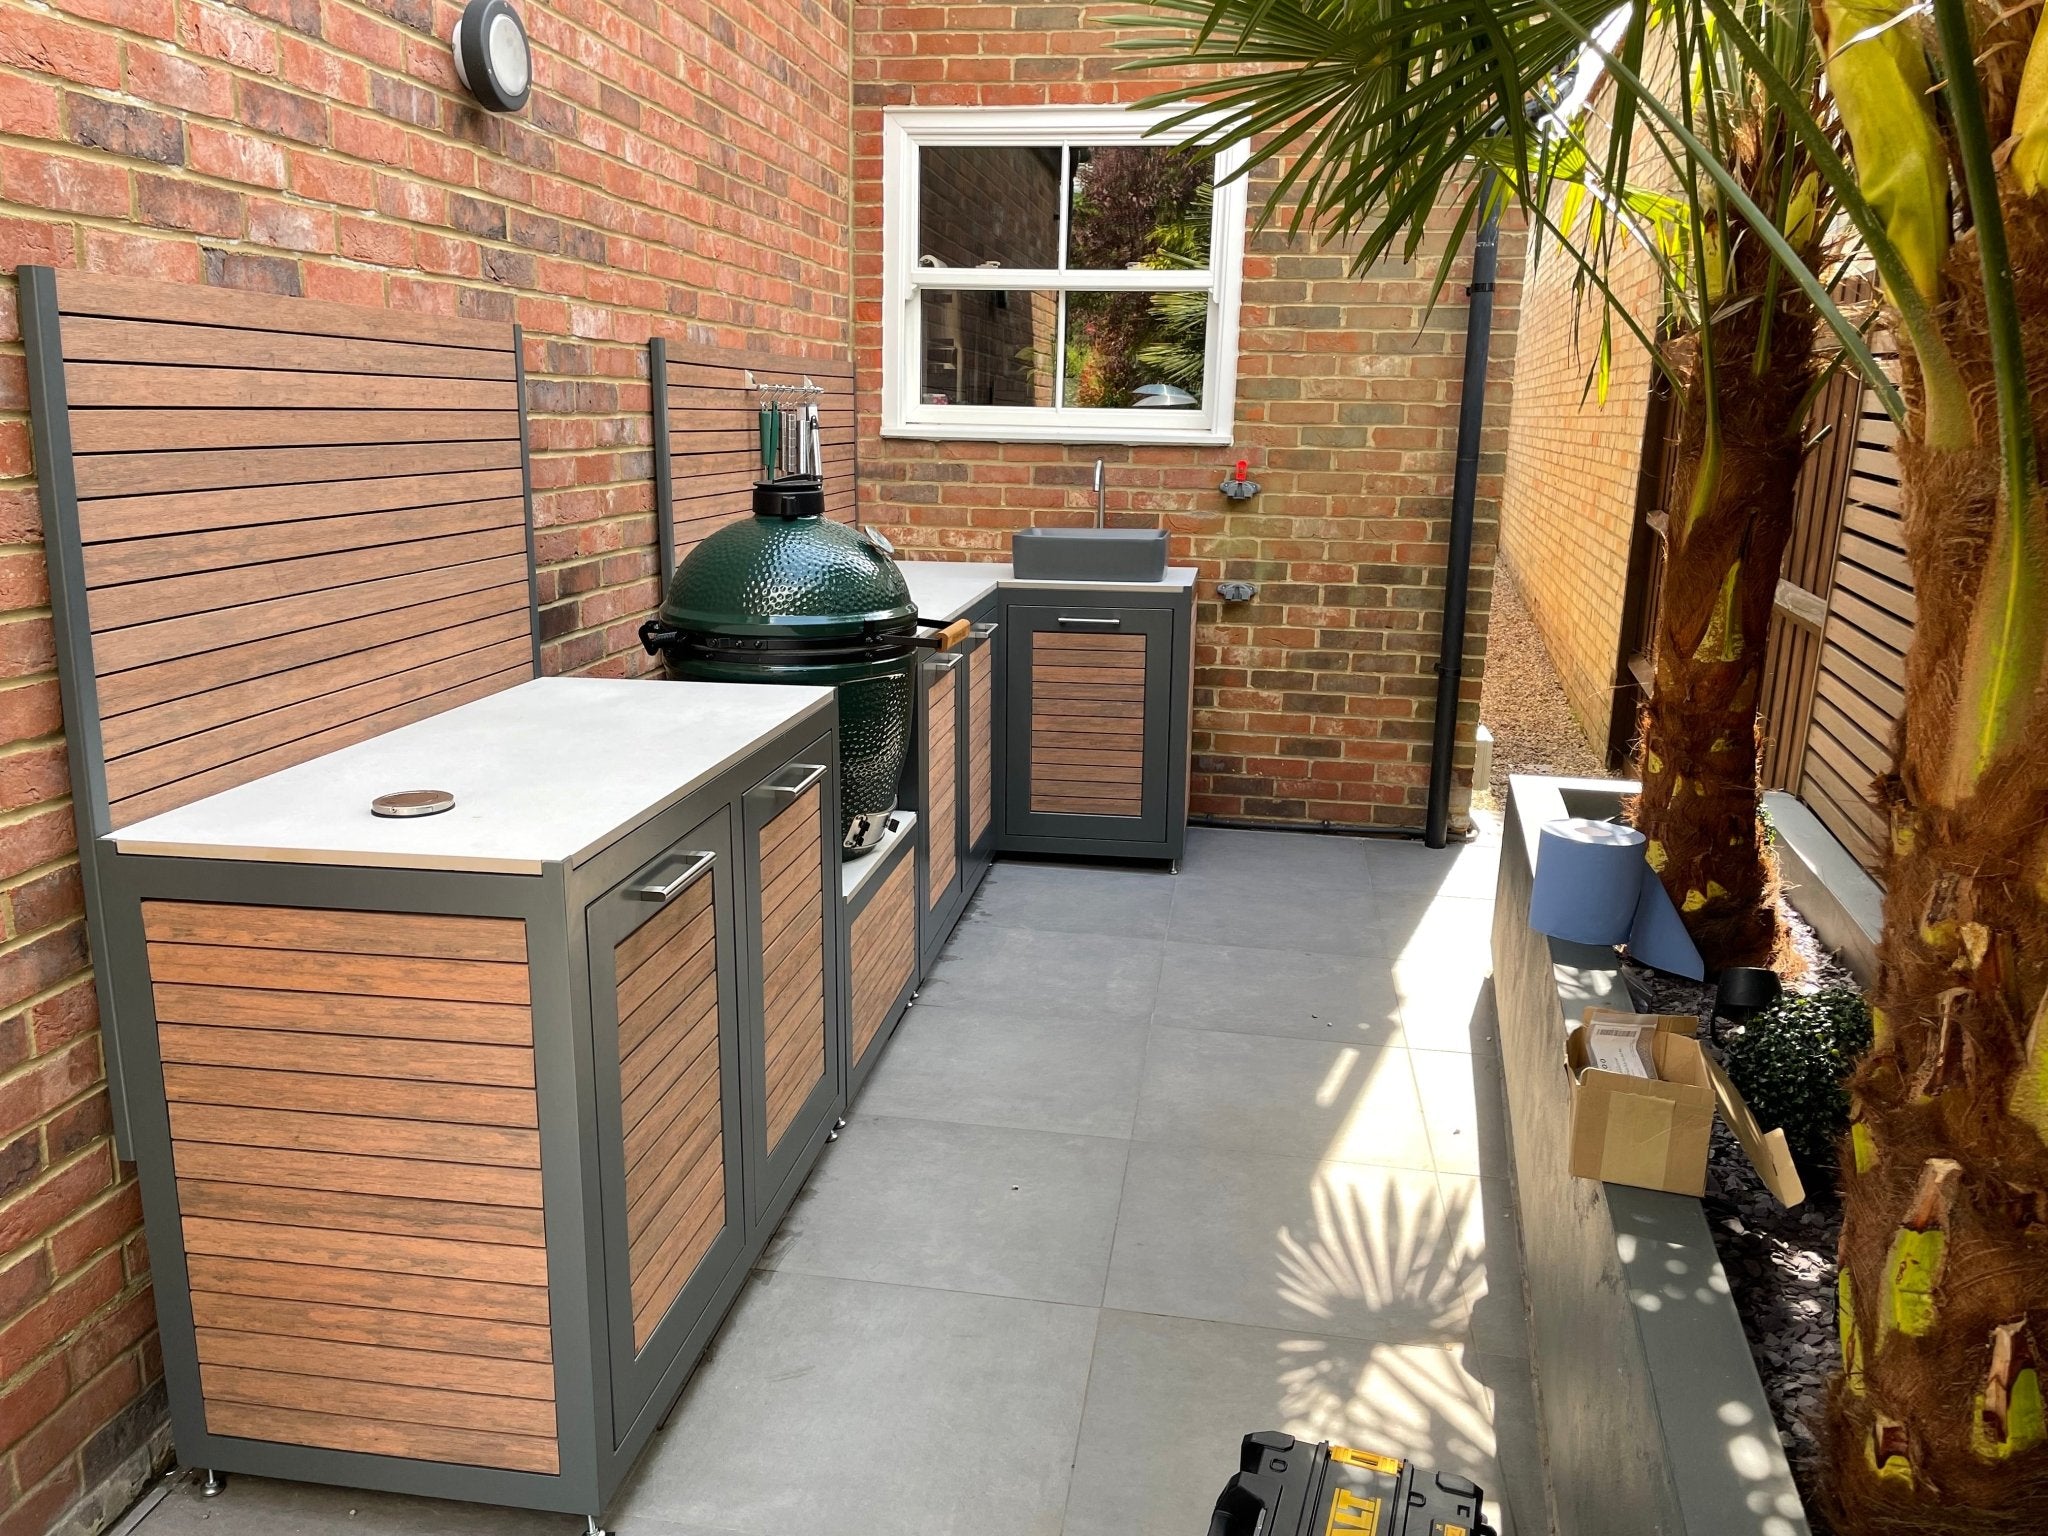 The Compact Range - The Outdoor Kitchen Company Ltd 